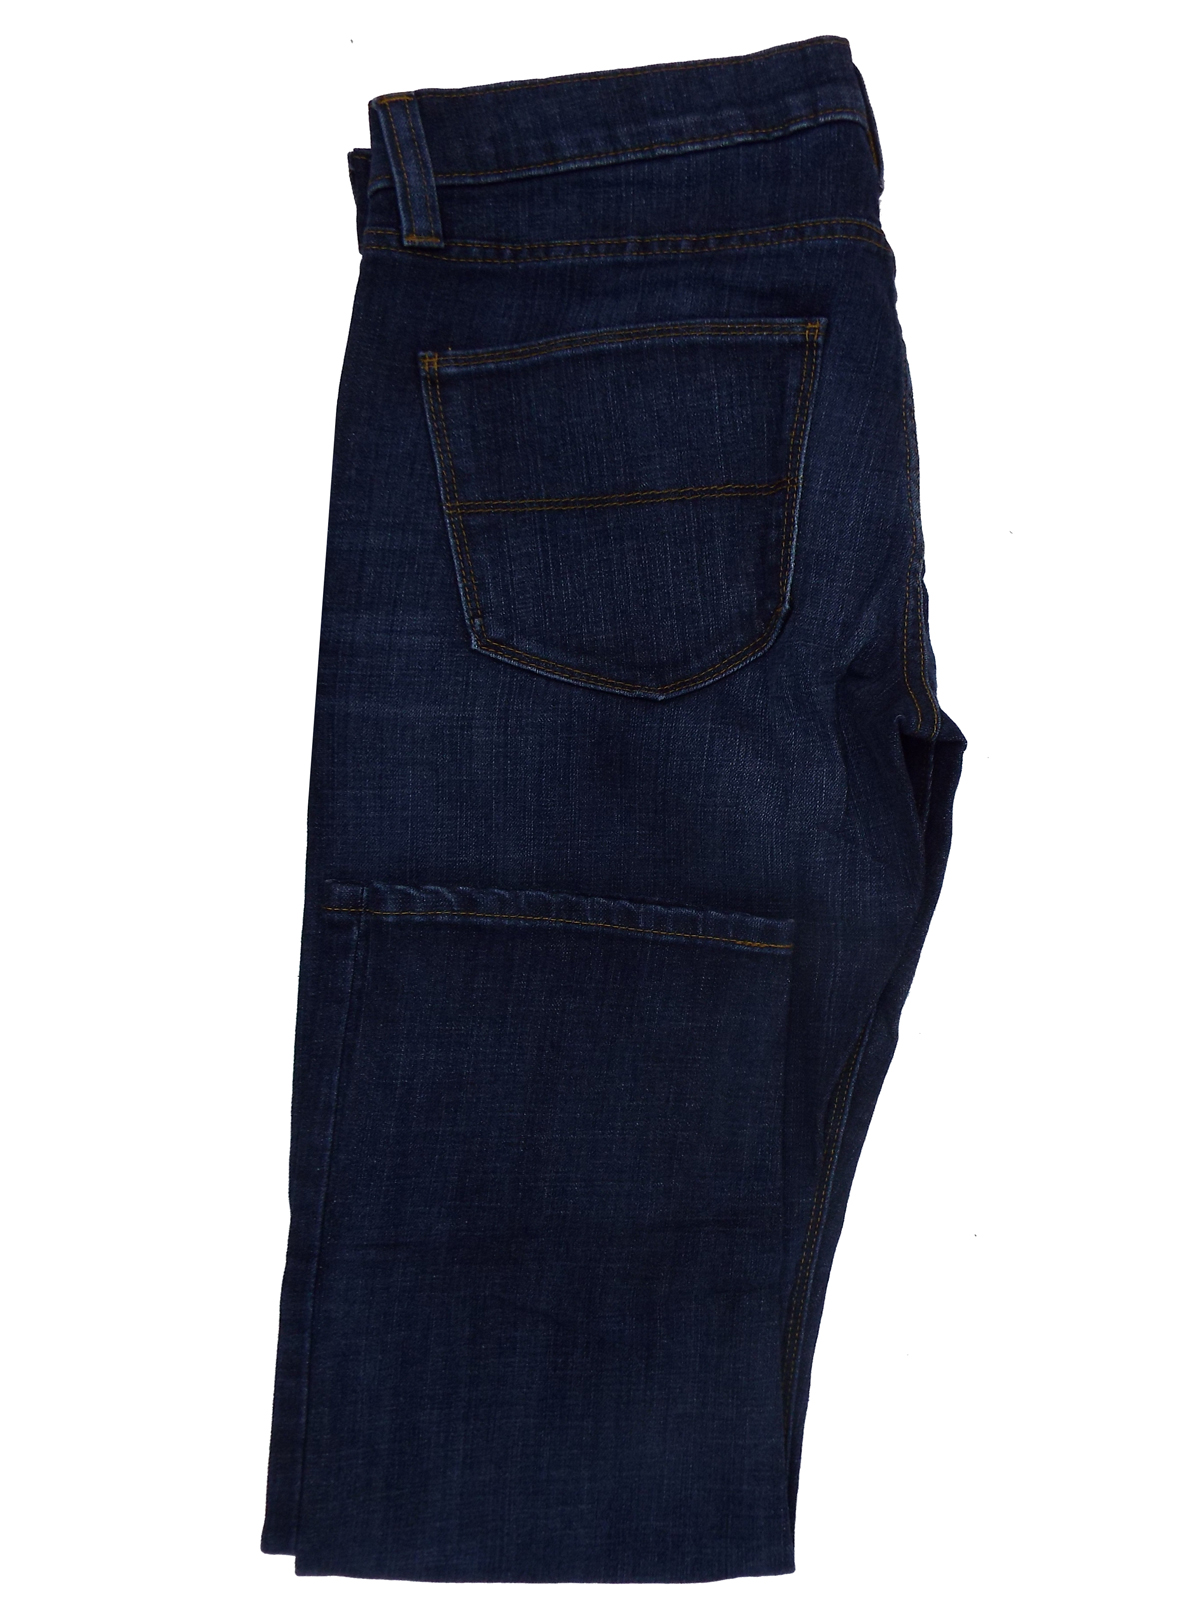 Marks and Spencer - - M&5 ASSORTED Mens Trousers - Waist Size 30 to 38 ...